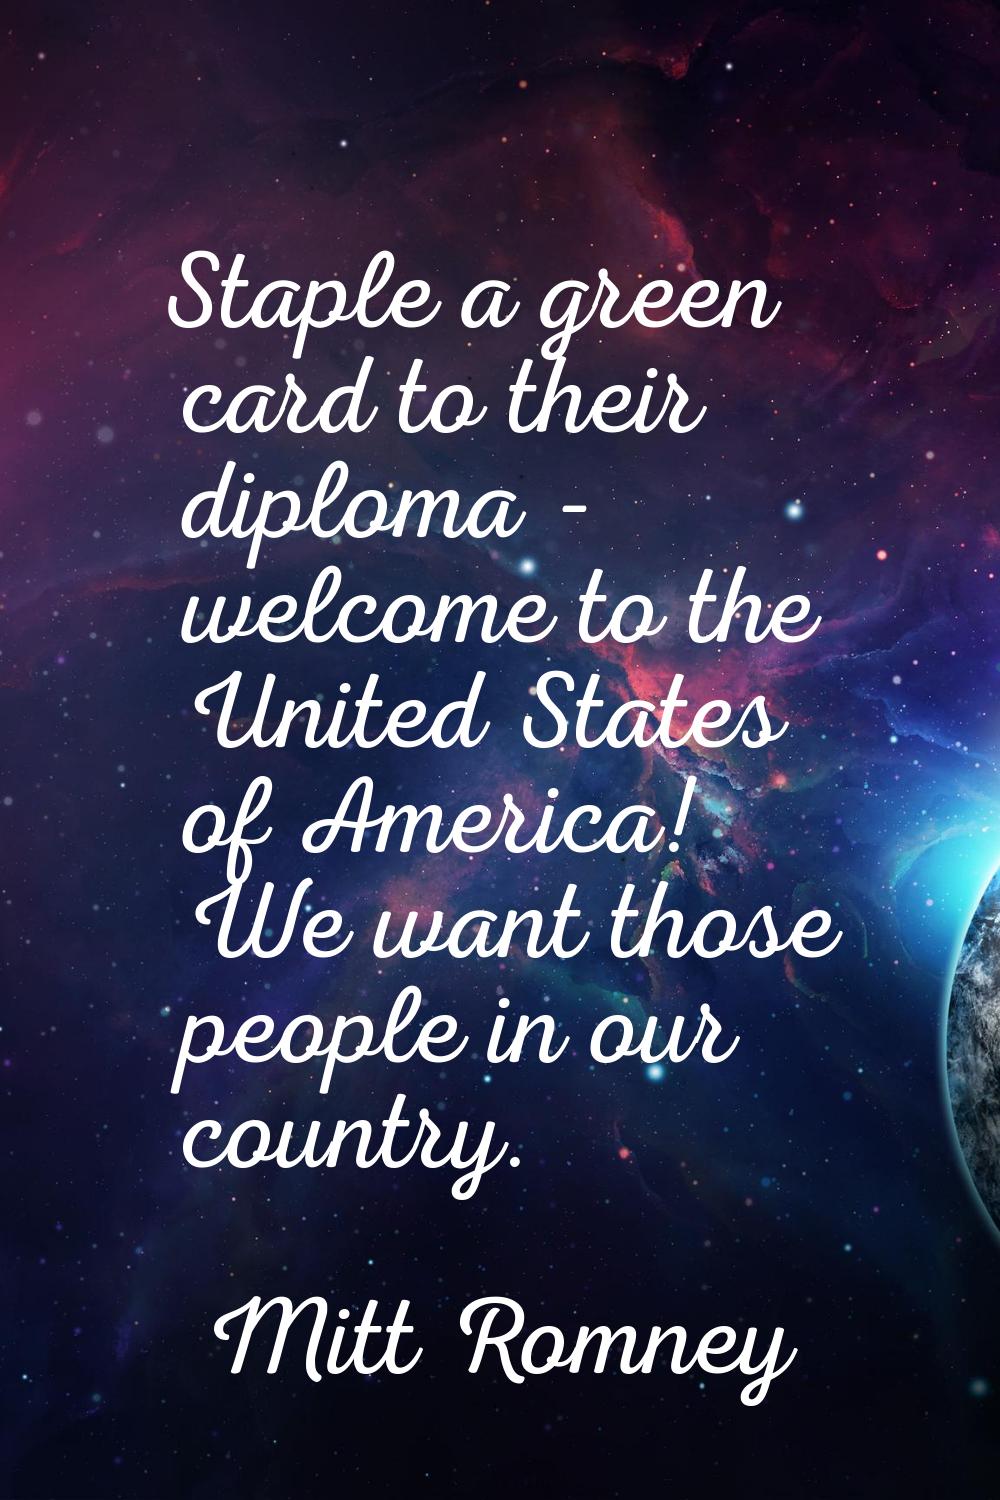 Staple a green card to their diploma - welcome to the United States of America! We want those peopl